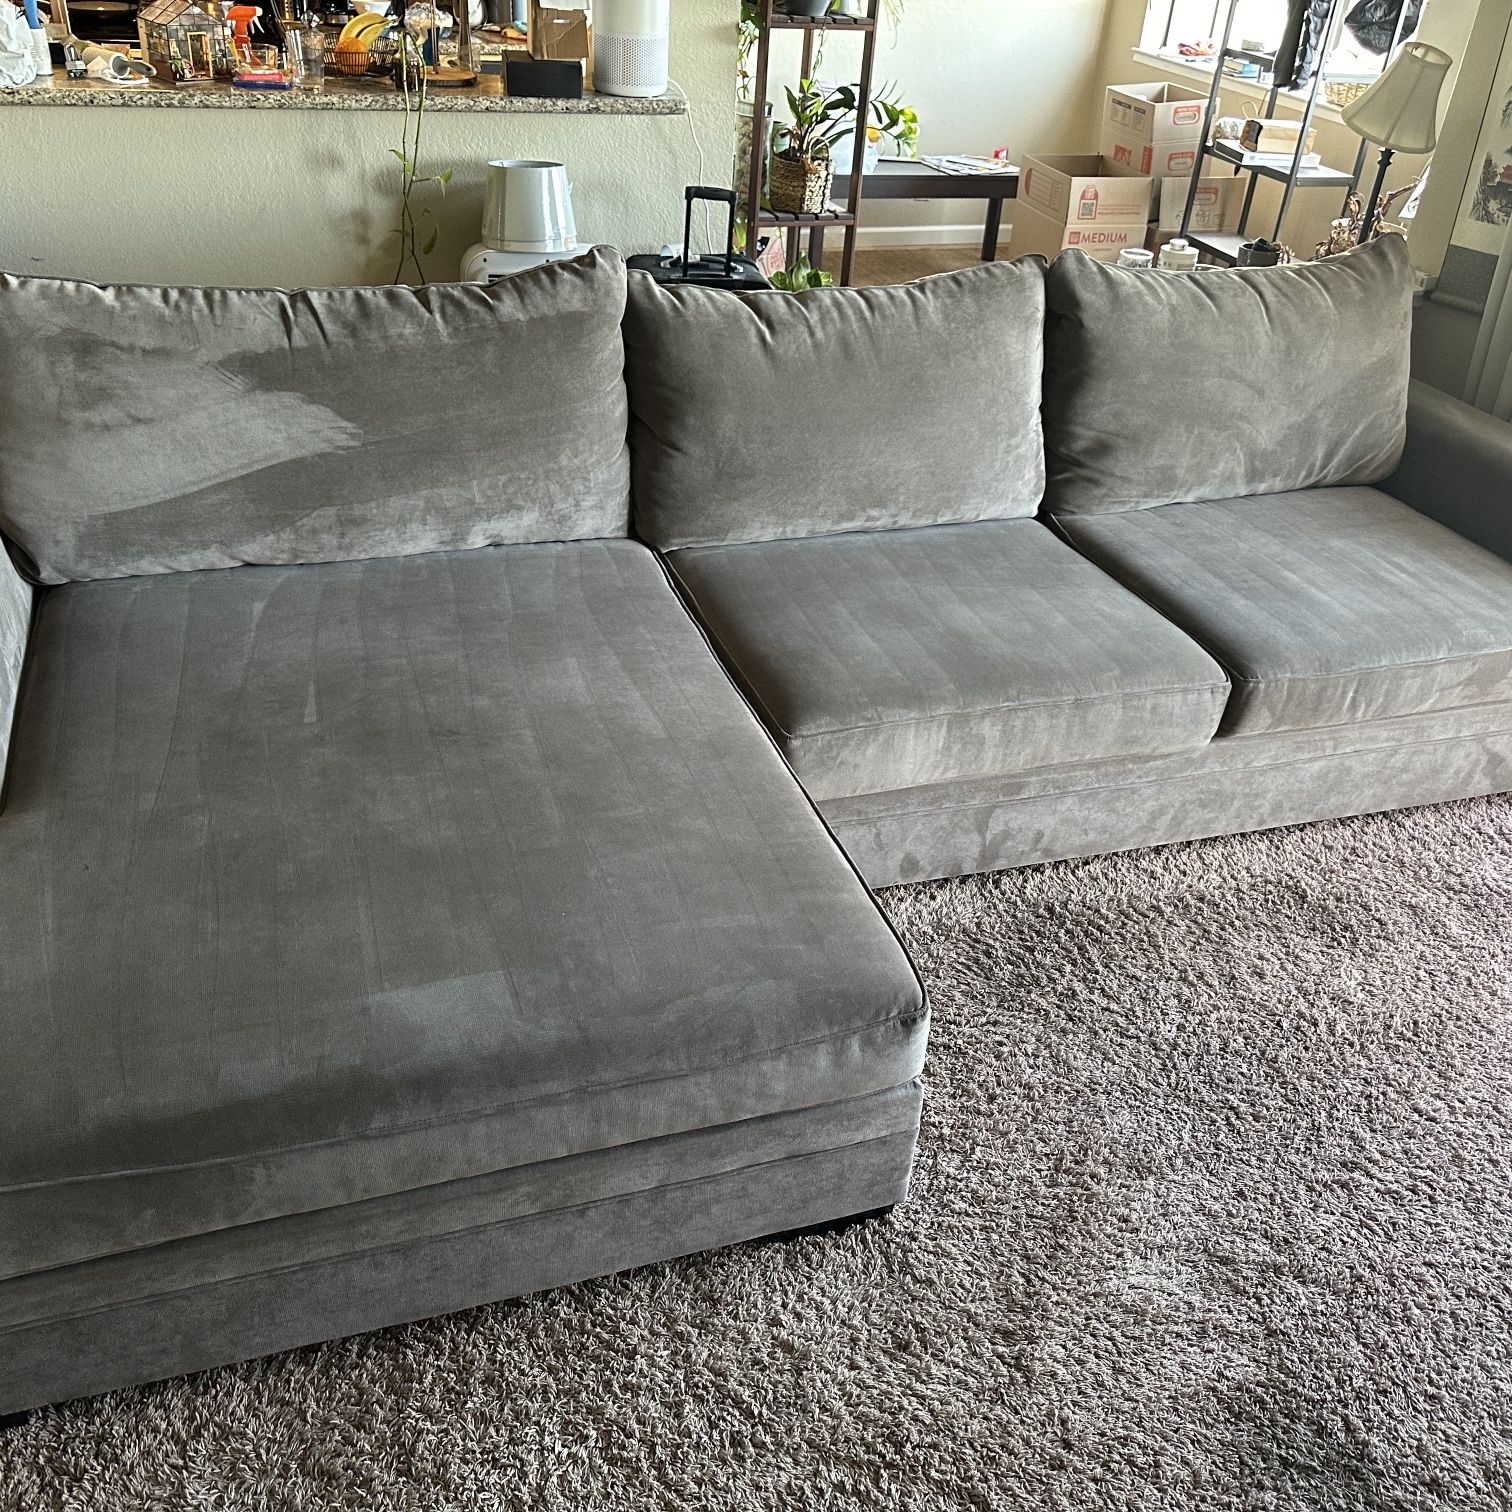 Large Super Comfy Living Spaces Sectional - Great Condition